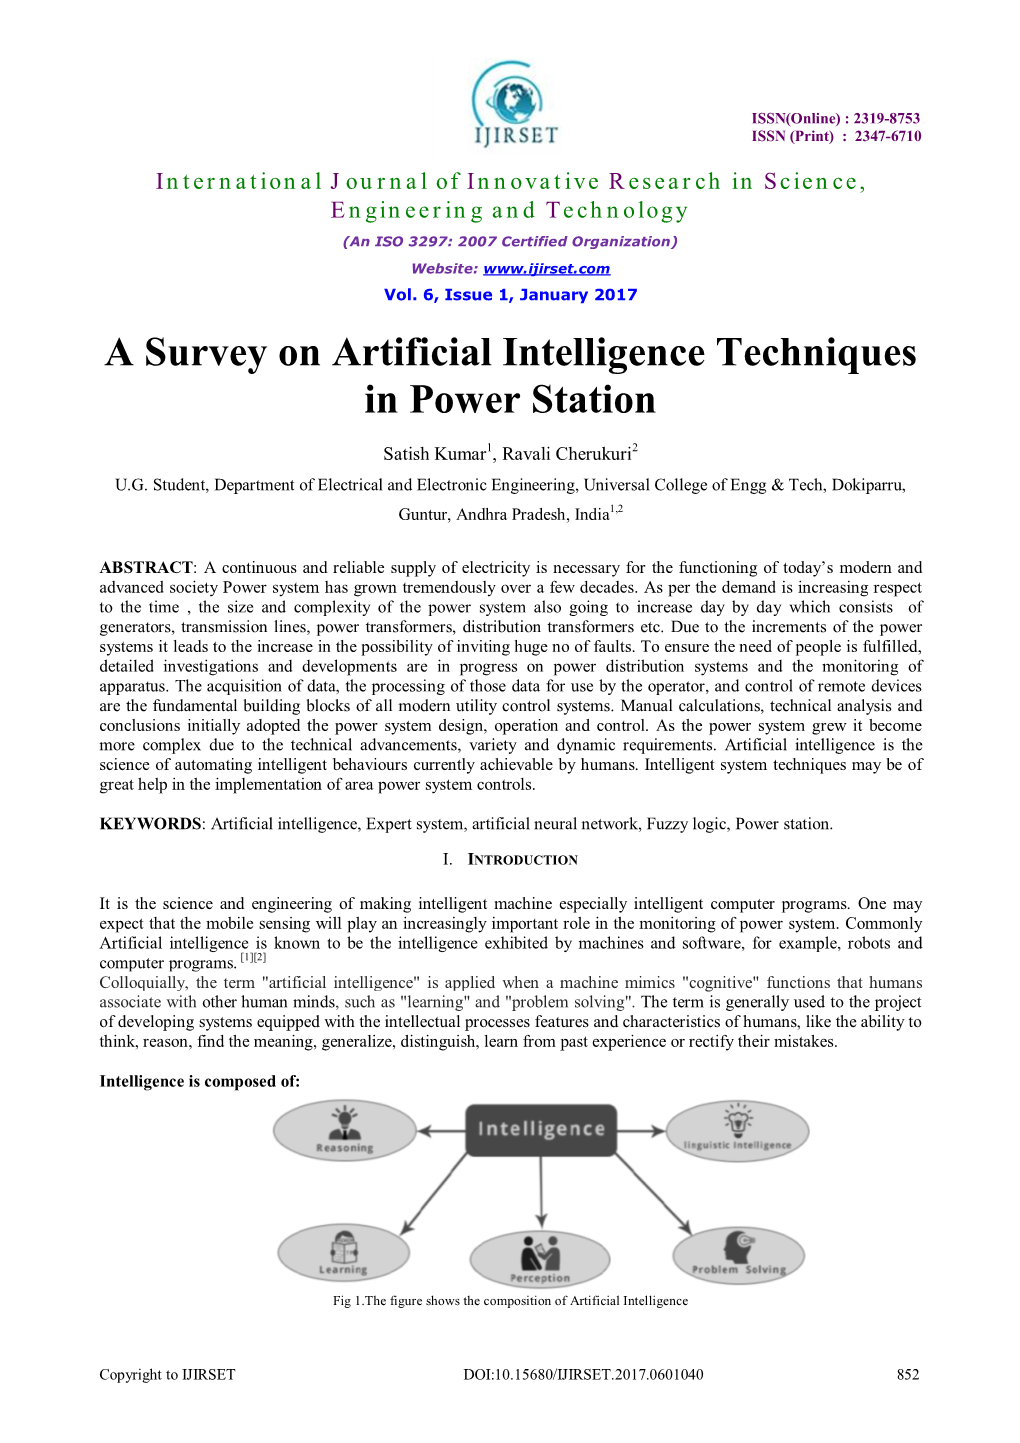 A Survey on Artificial Intelligence Techniques in Power Station